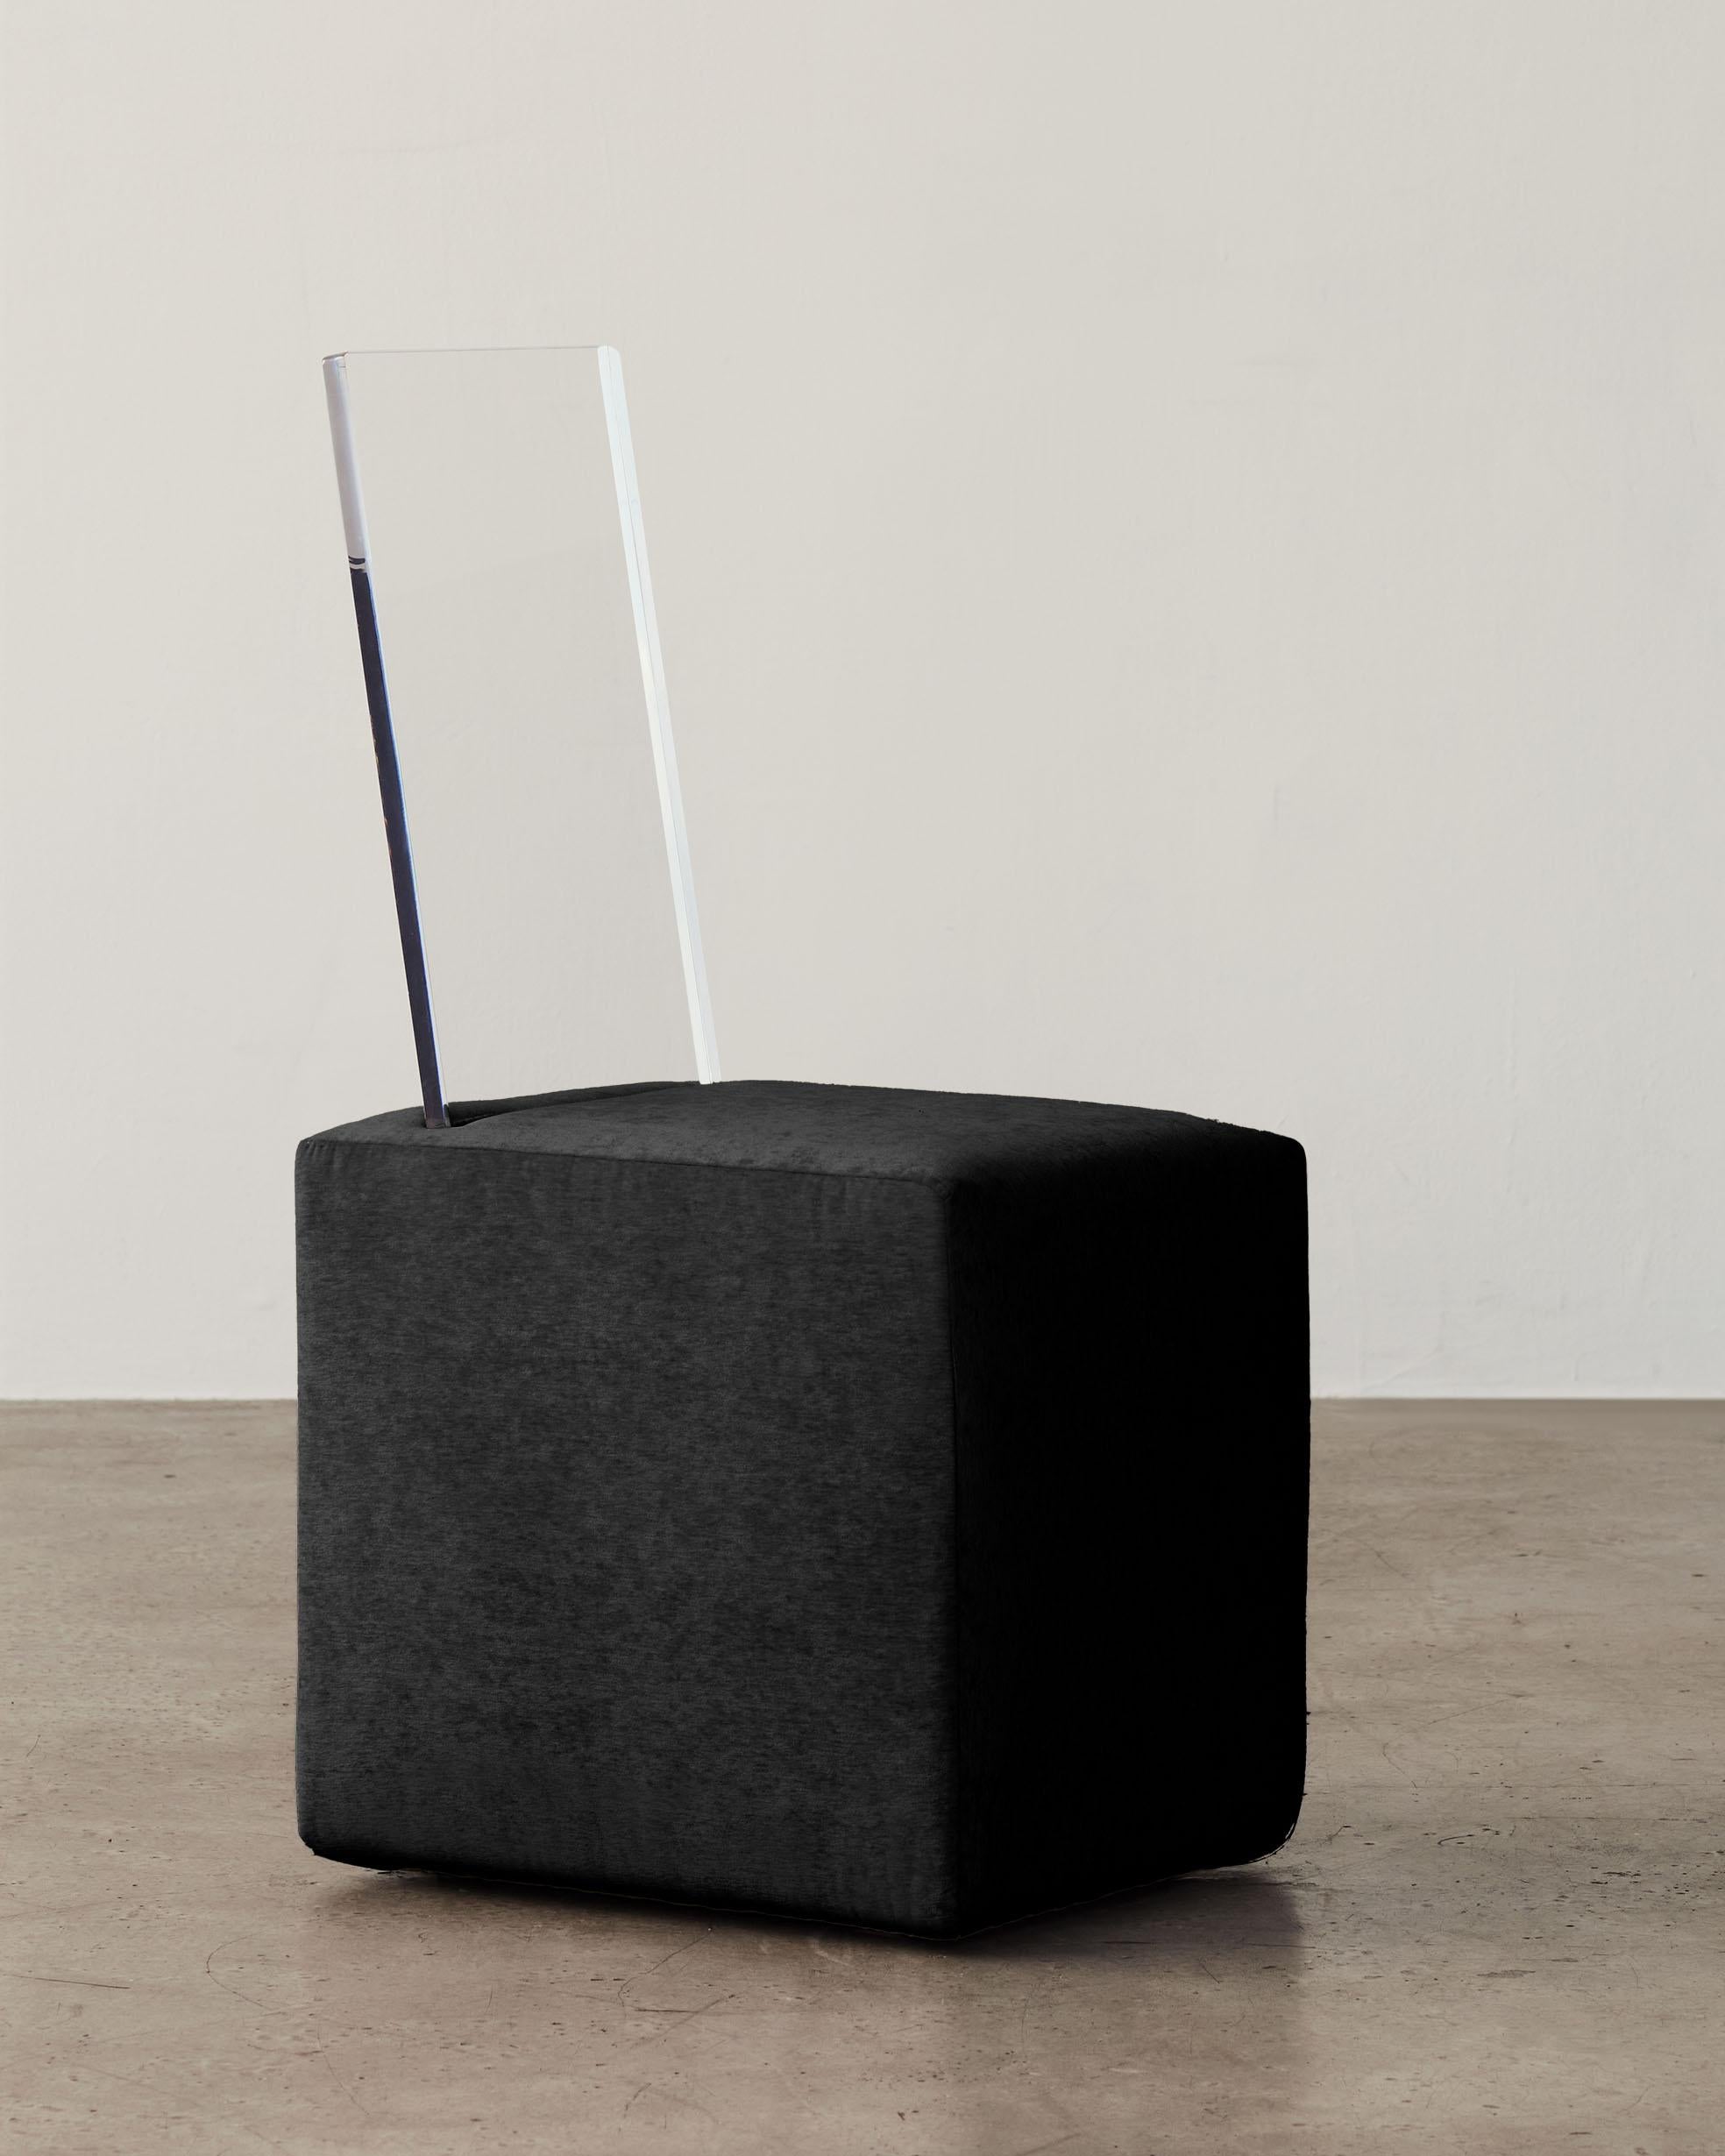 As seen in: Sight Unseen, Interior Design Magazine, Surface Magazine

BLOC Cube Chair is part of a five-piece collection of sculptural upholstered and mixed-material furniture. BLOC Collection draws inspiration from familiar geometric shapes often